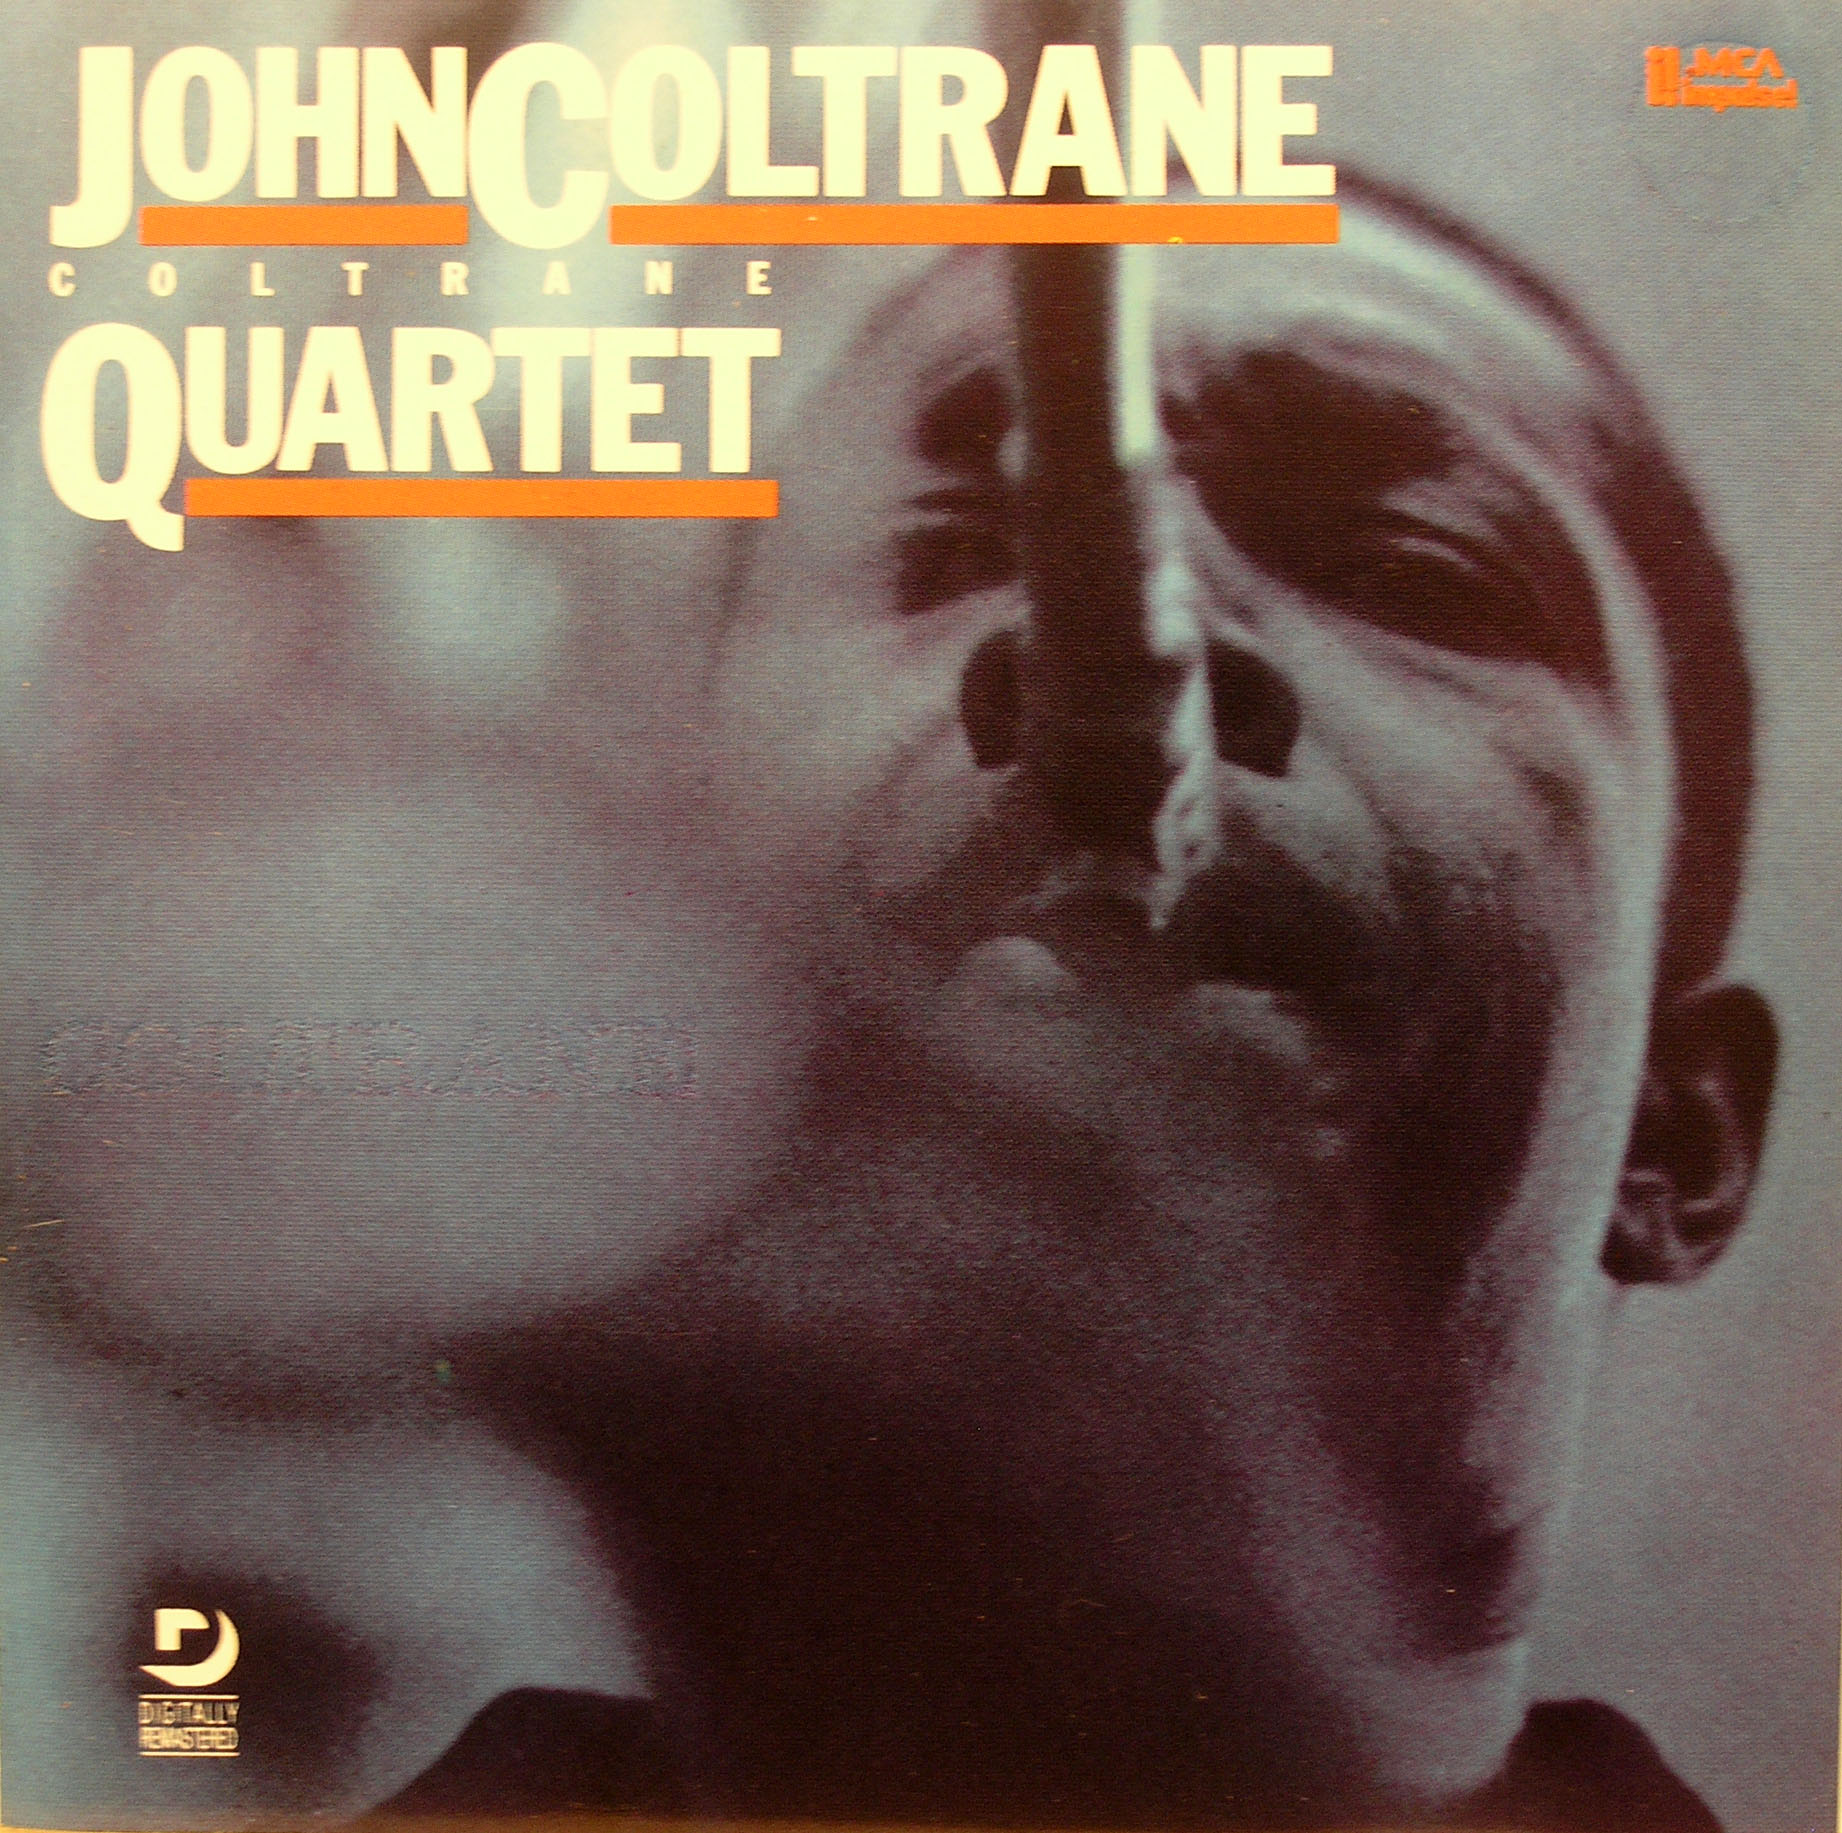 an album cover with a man's face and the words john coltane on it